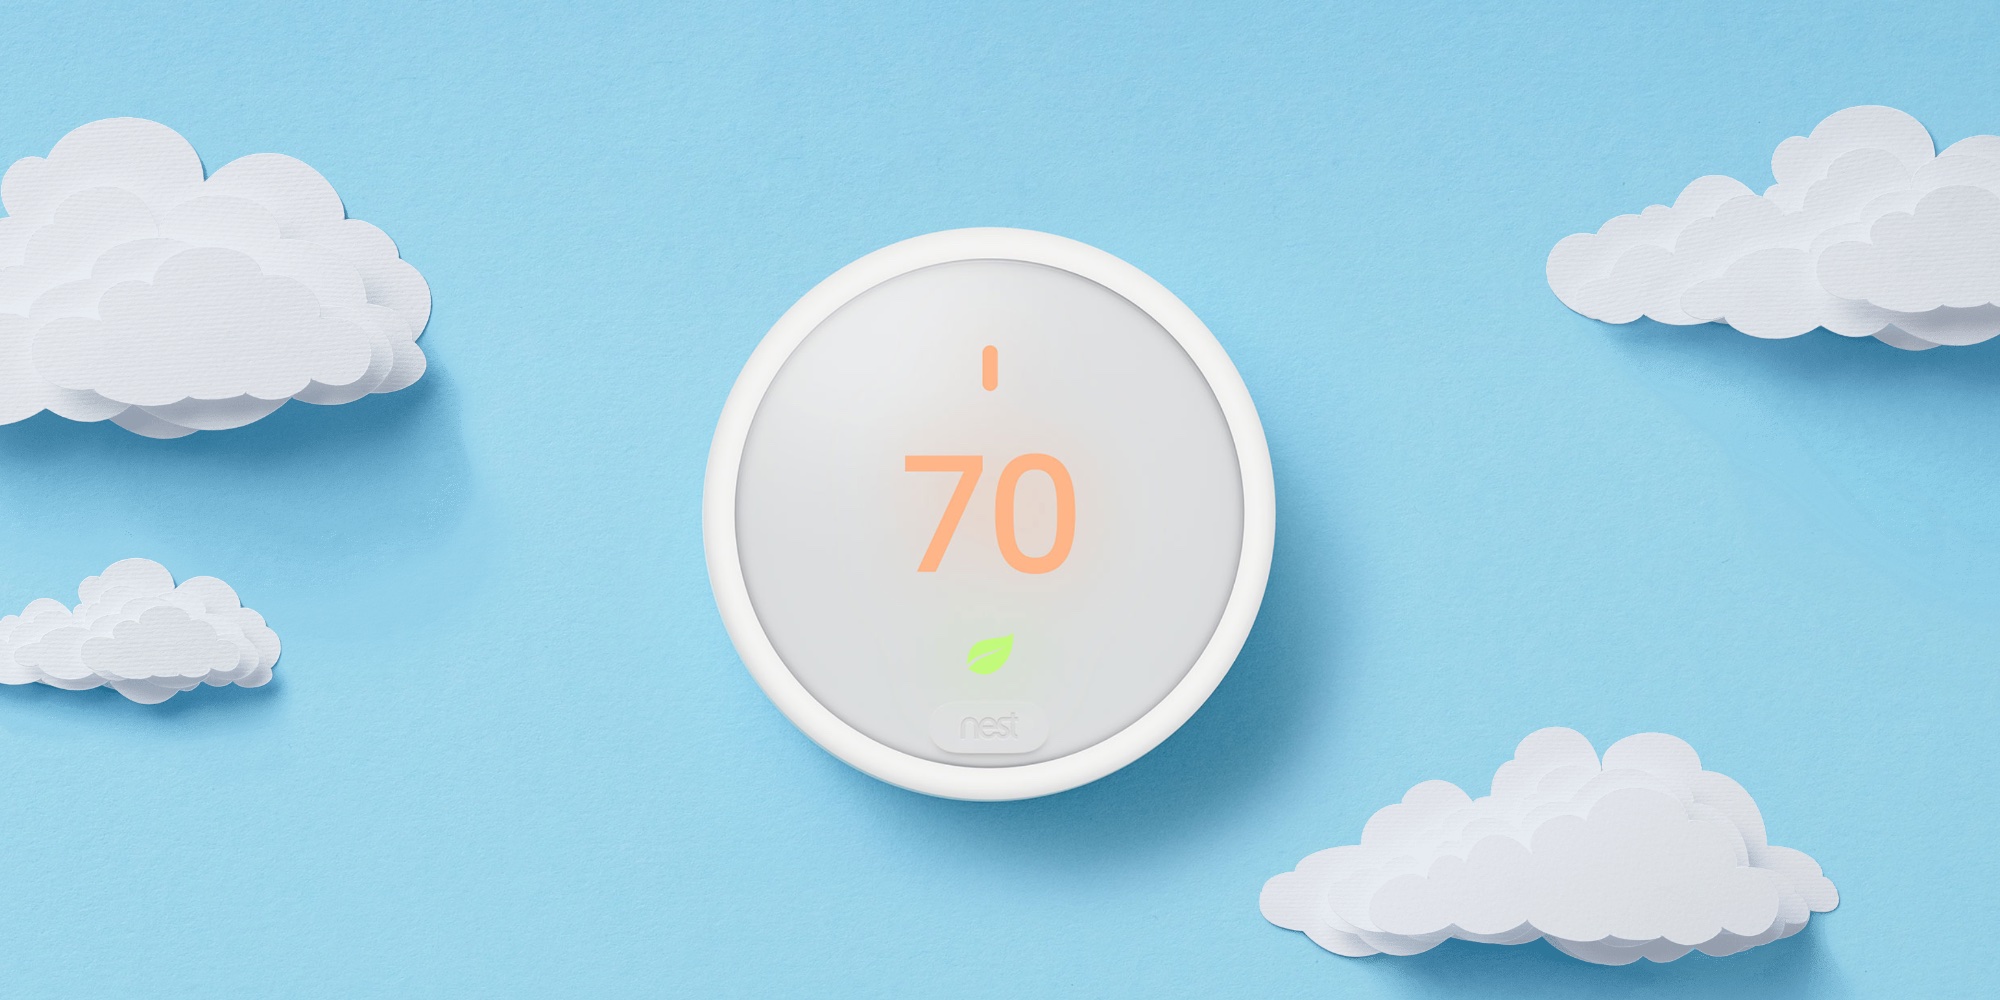 nest doorbell and thermostat bundle